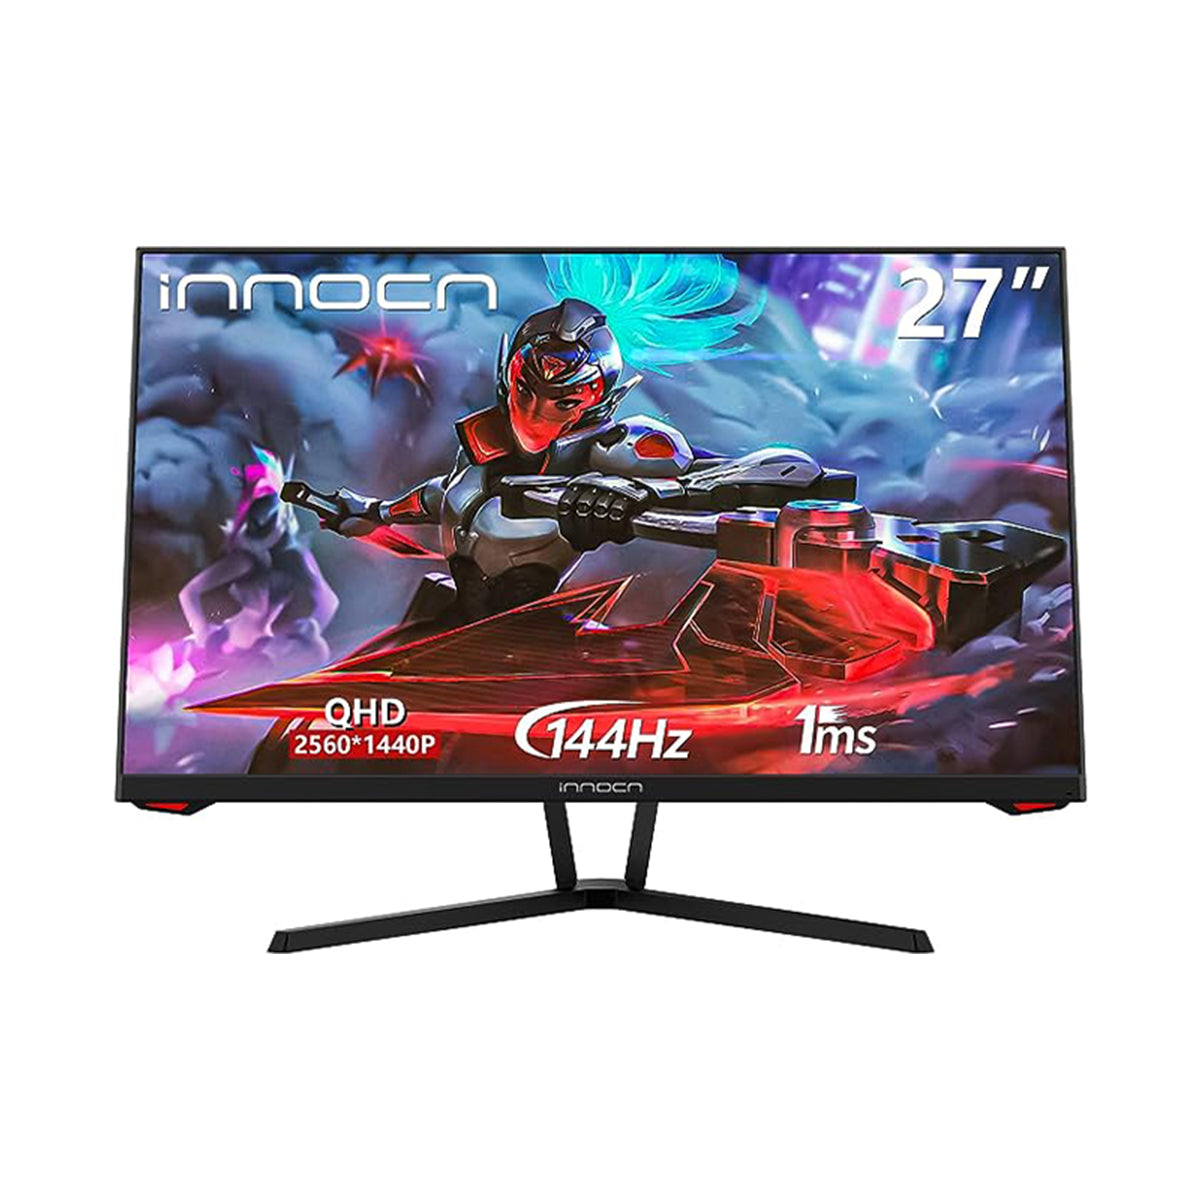 INNOCN 27G1V 27 Inch Monitor 4K 144Hz HDR400 PC Computer Gaming Monitor  G-Sync Compatible, 1MS, USB Type-C, HDMI, DisPlayPort, Height Adjustable